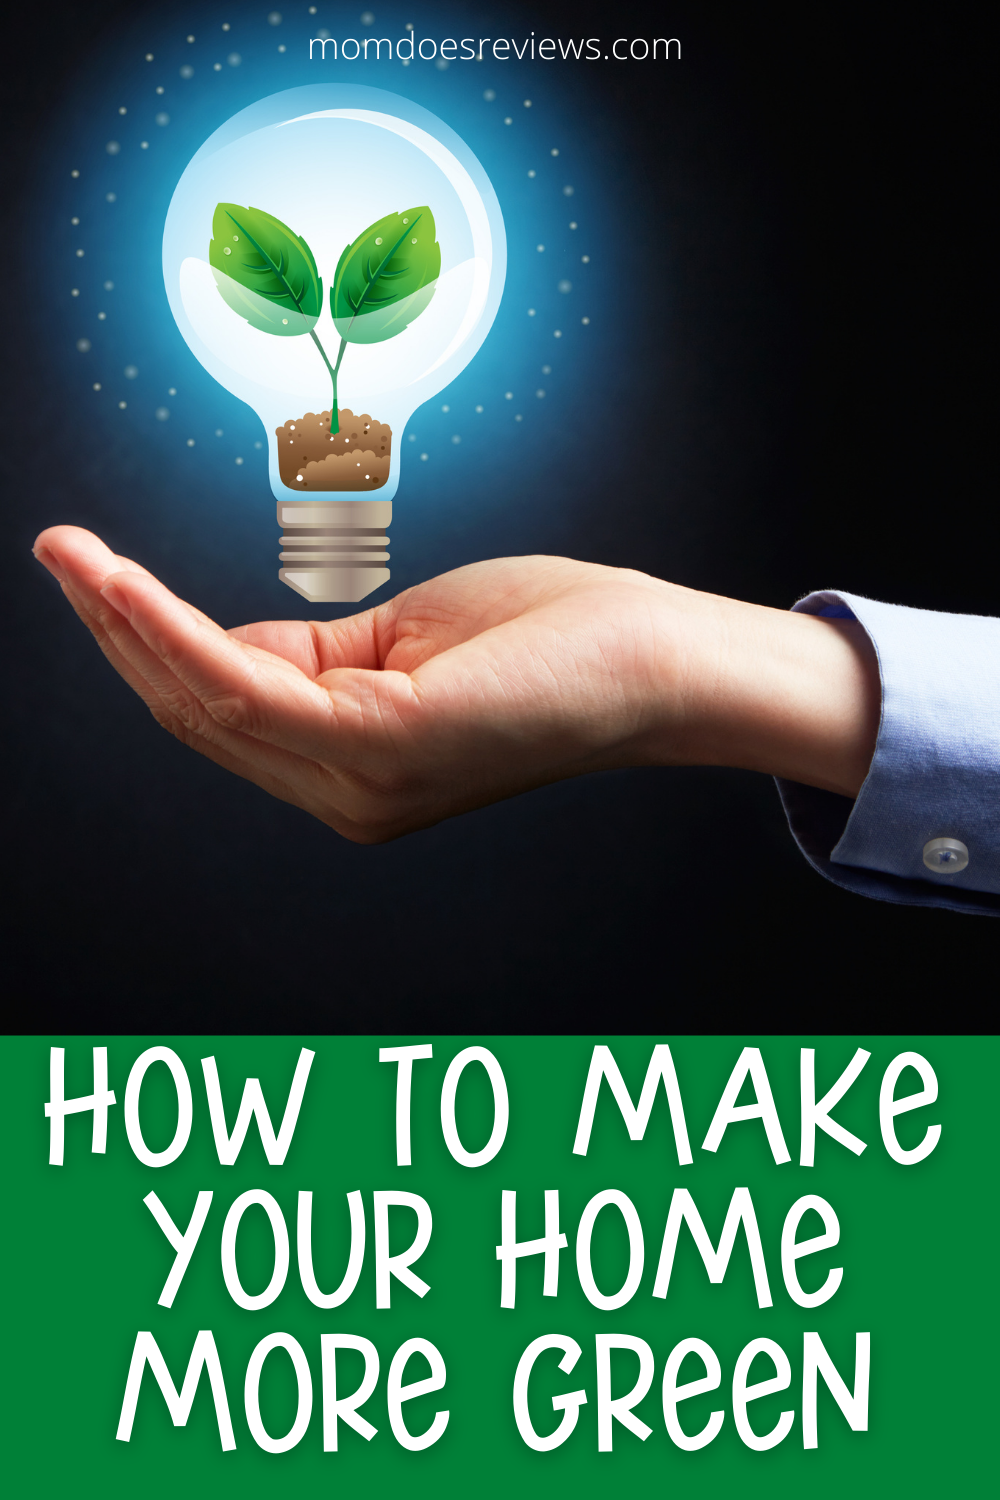 How to Make Your Home More Green